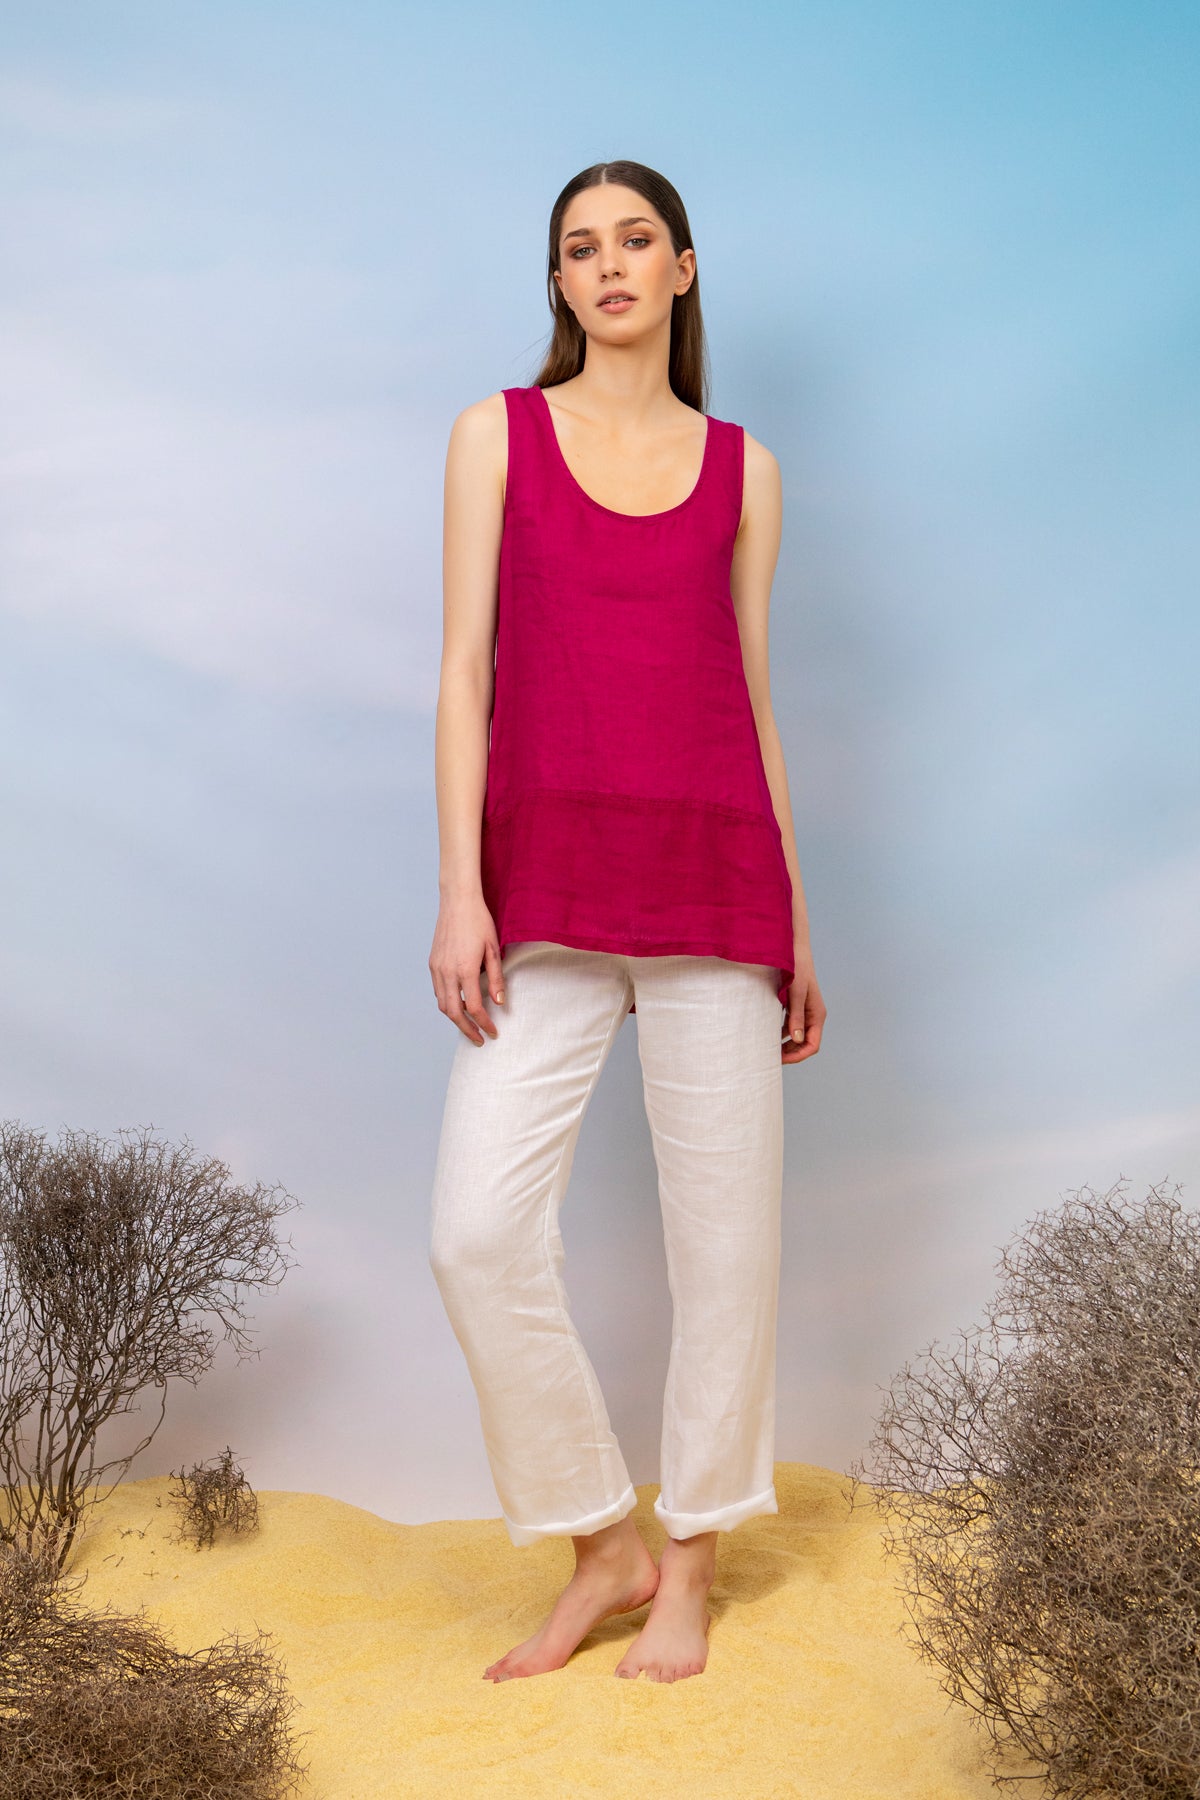 A woman stands barefoot on light yellow sand against a gradient blue sky, wearing a DS Collection Sleeveless Linen Blouse in magenta and white pants, with sparse bushes in the foreground. Perfect for any summer wardrobe, this breathable top offers both comfort and style amidst the serene landscape.